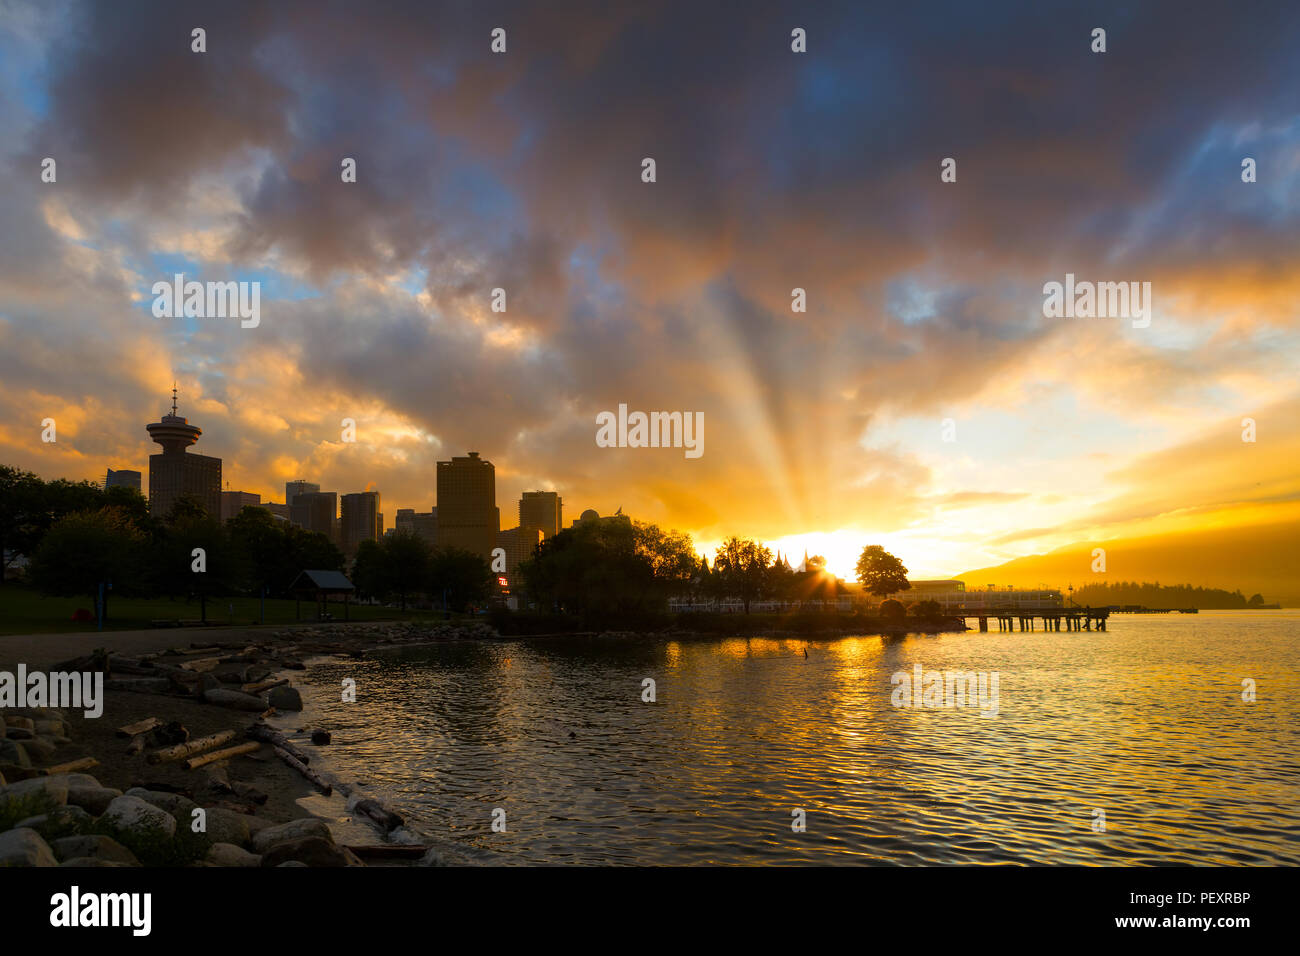 Sunset over Vancouver British Columbia Canada city skyline by Crab Park at Portside Stock Photo